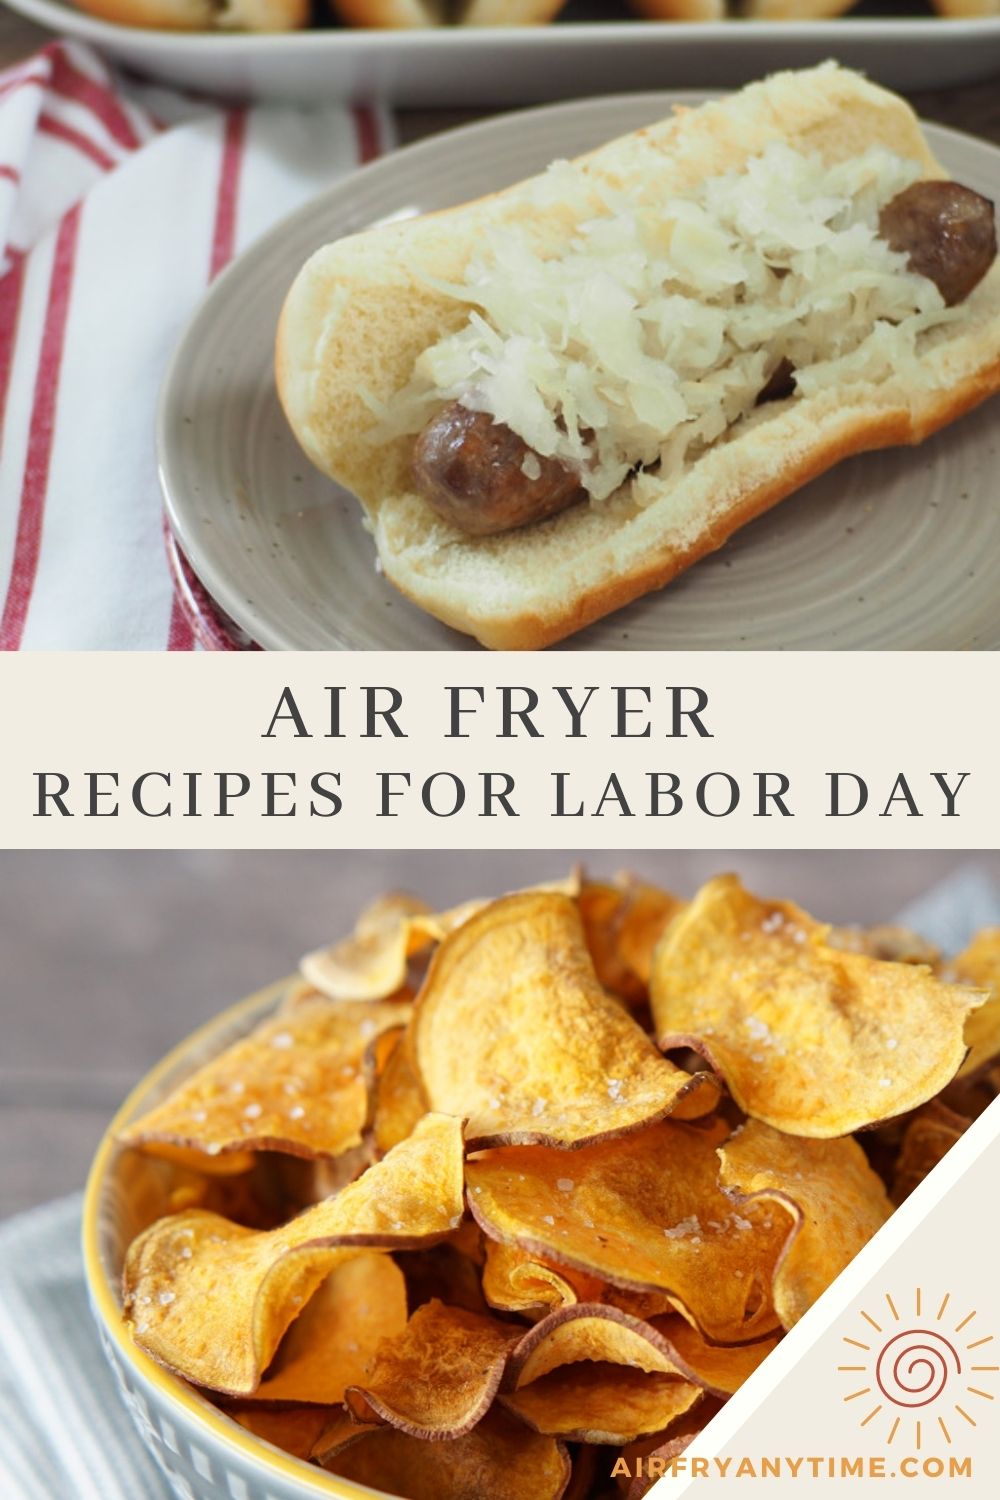 Air fryer brats and sweet potato chips